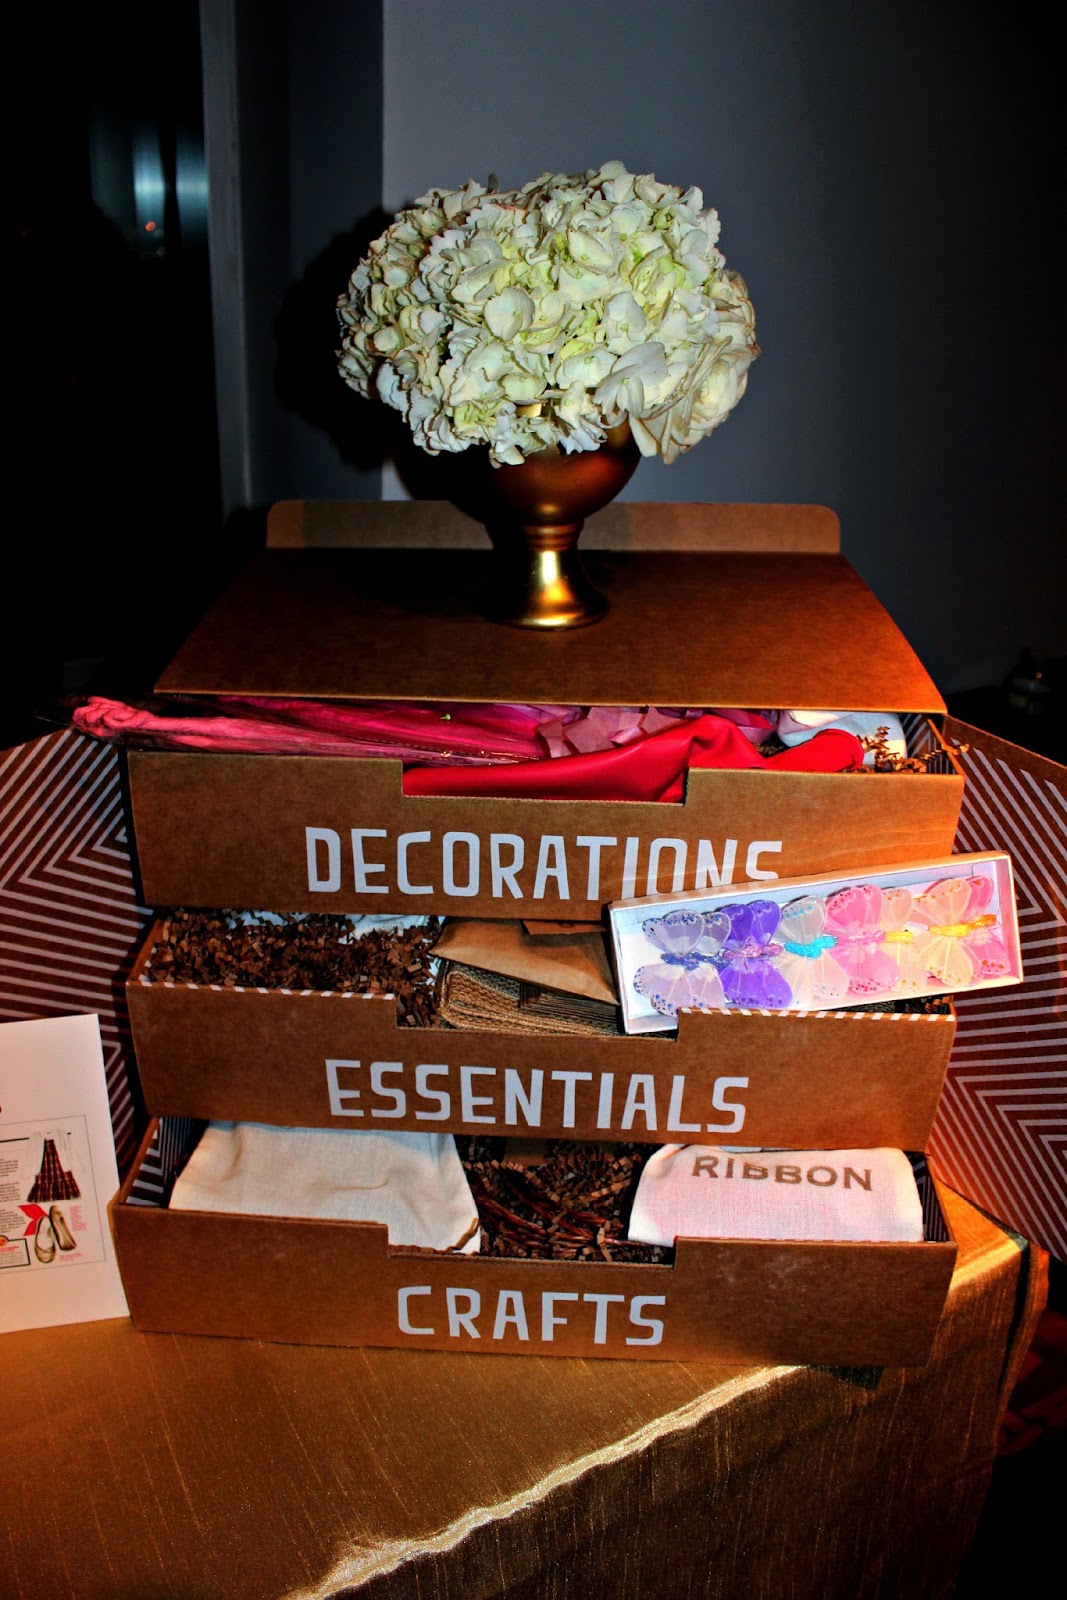 Celebrate the Season InStyle Decorations Essentials Crafts #CelebrateInStyle